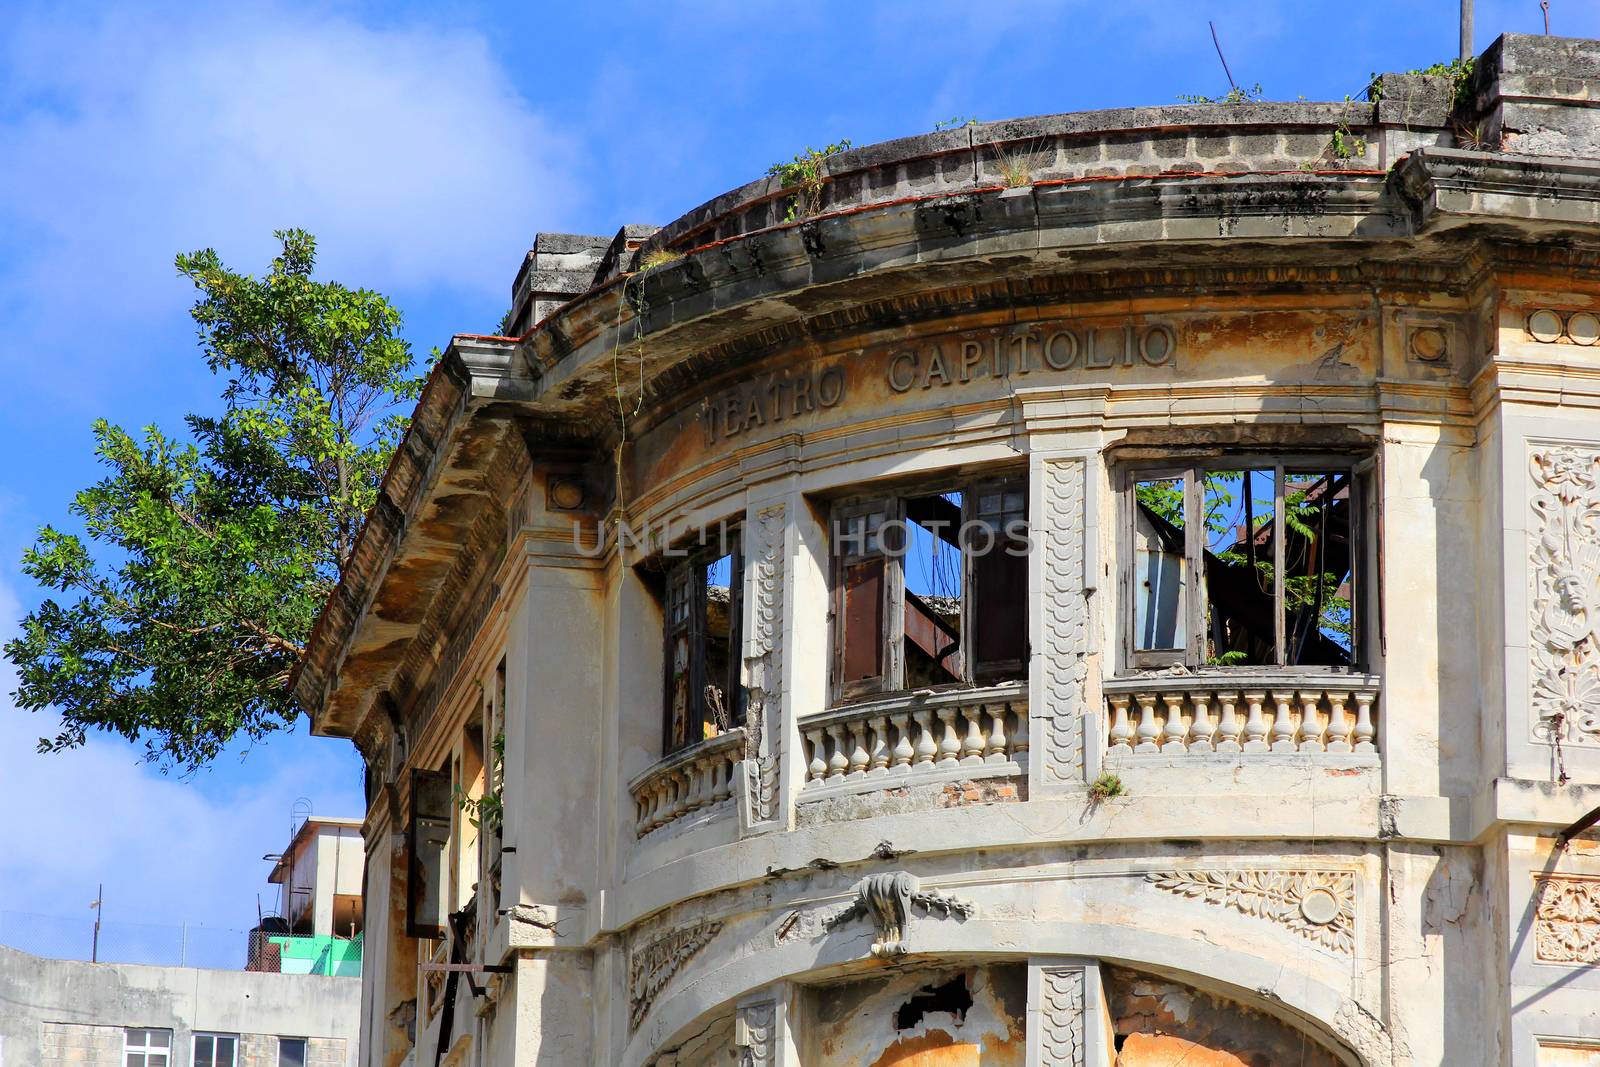 Deteriorated building Teatro Capitolio in Old Havana by friday